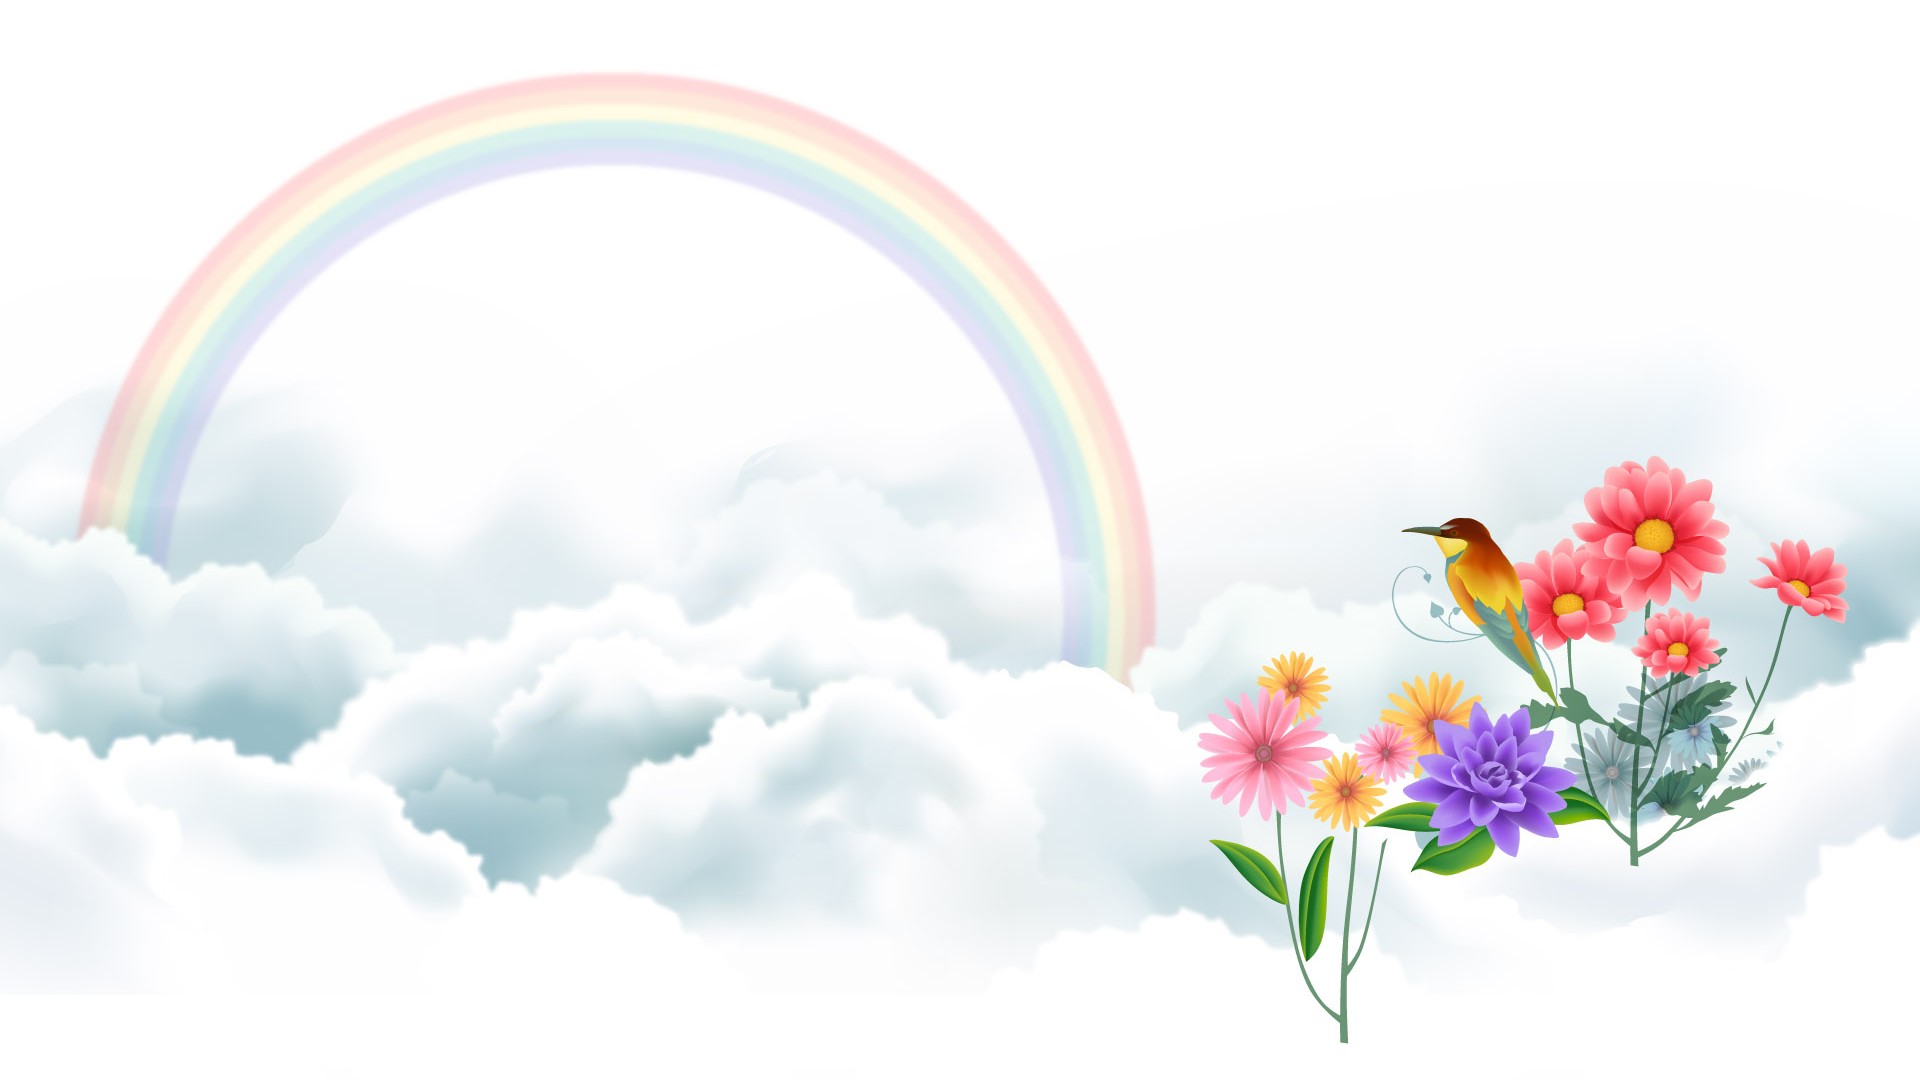 Best Cute Rainbow Wallpaper with image resolution 1920x1080 pixel. You can use this wallpaper as background for your desktop Computer Screensavers, Android or iPhone smartphones